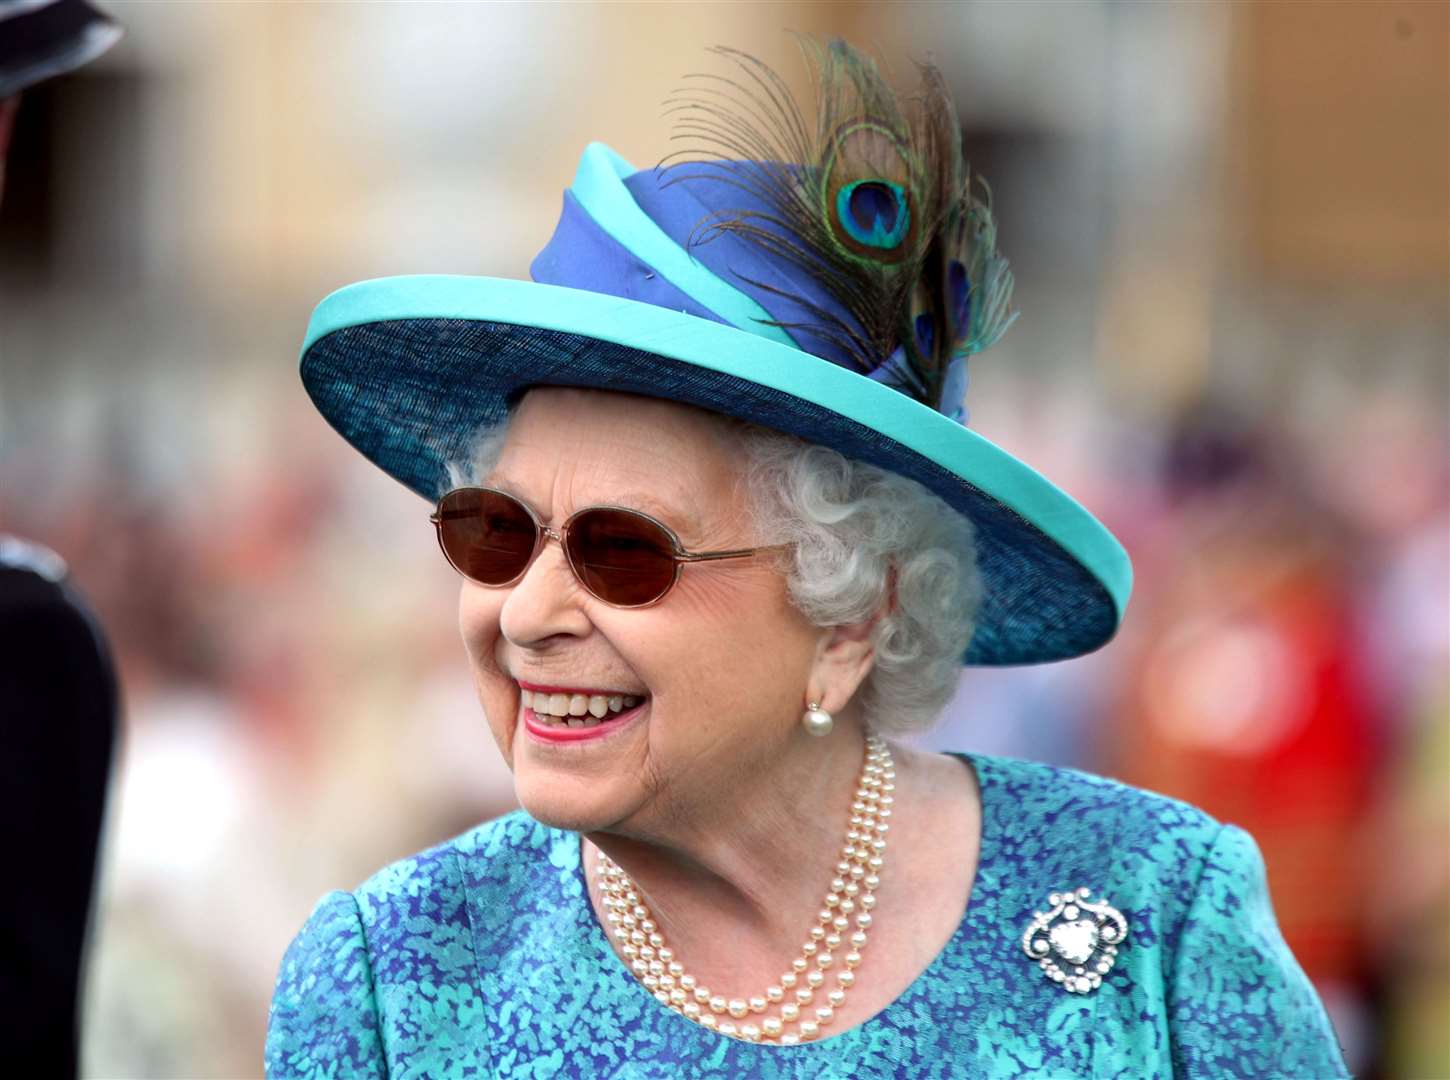 The Queen wearing sunglasses in May 2018 (Yui Mok/PA)